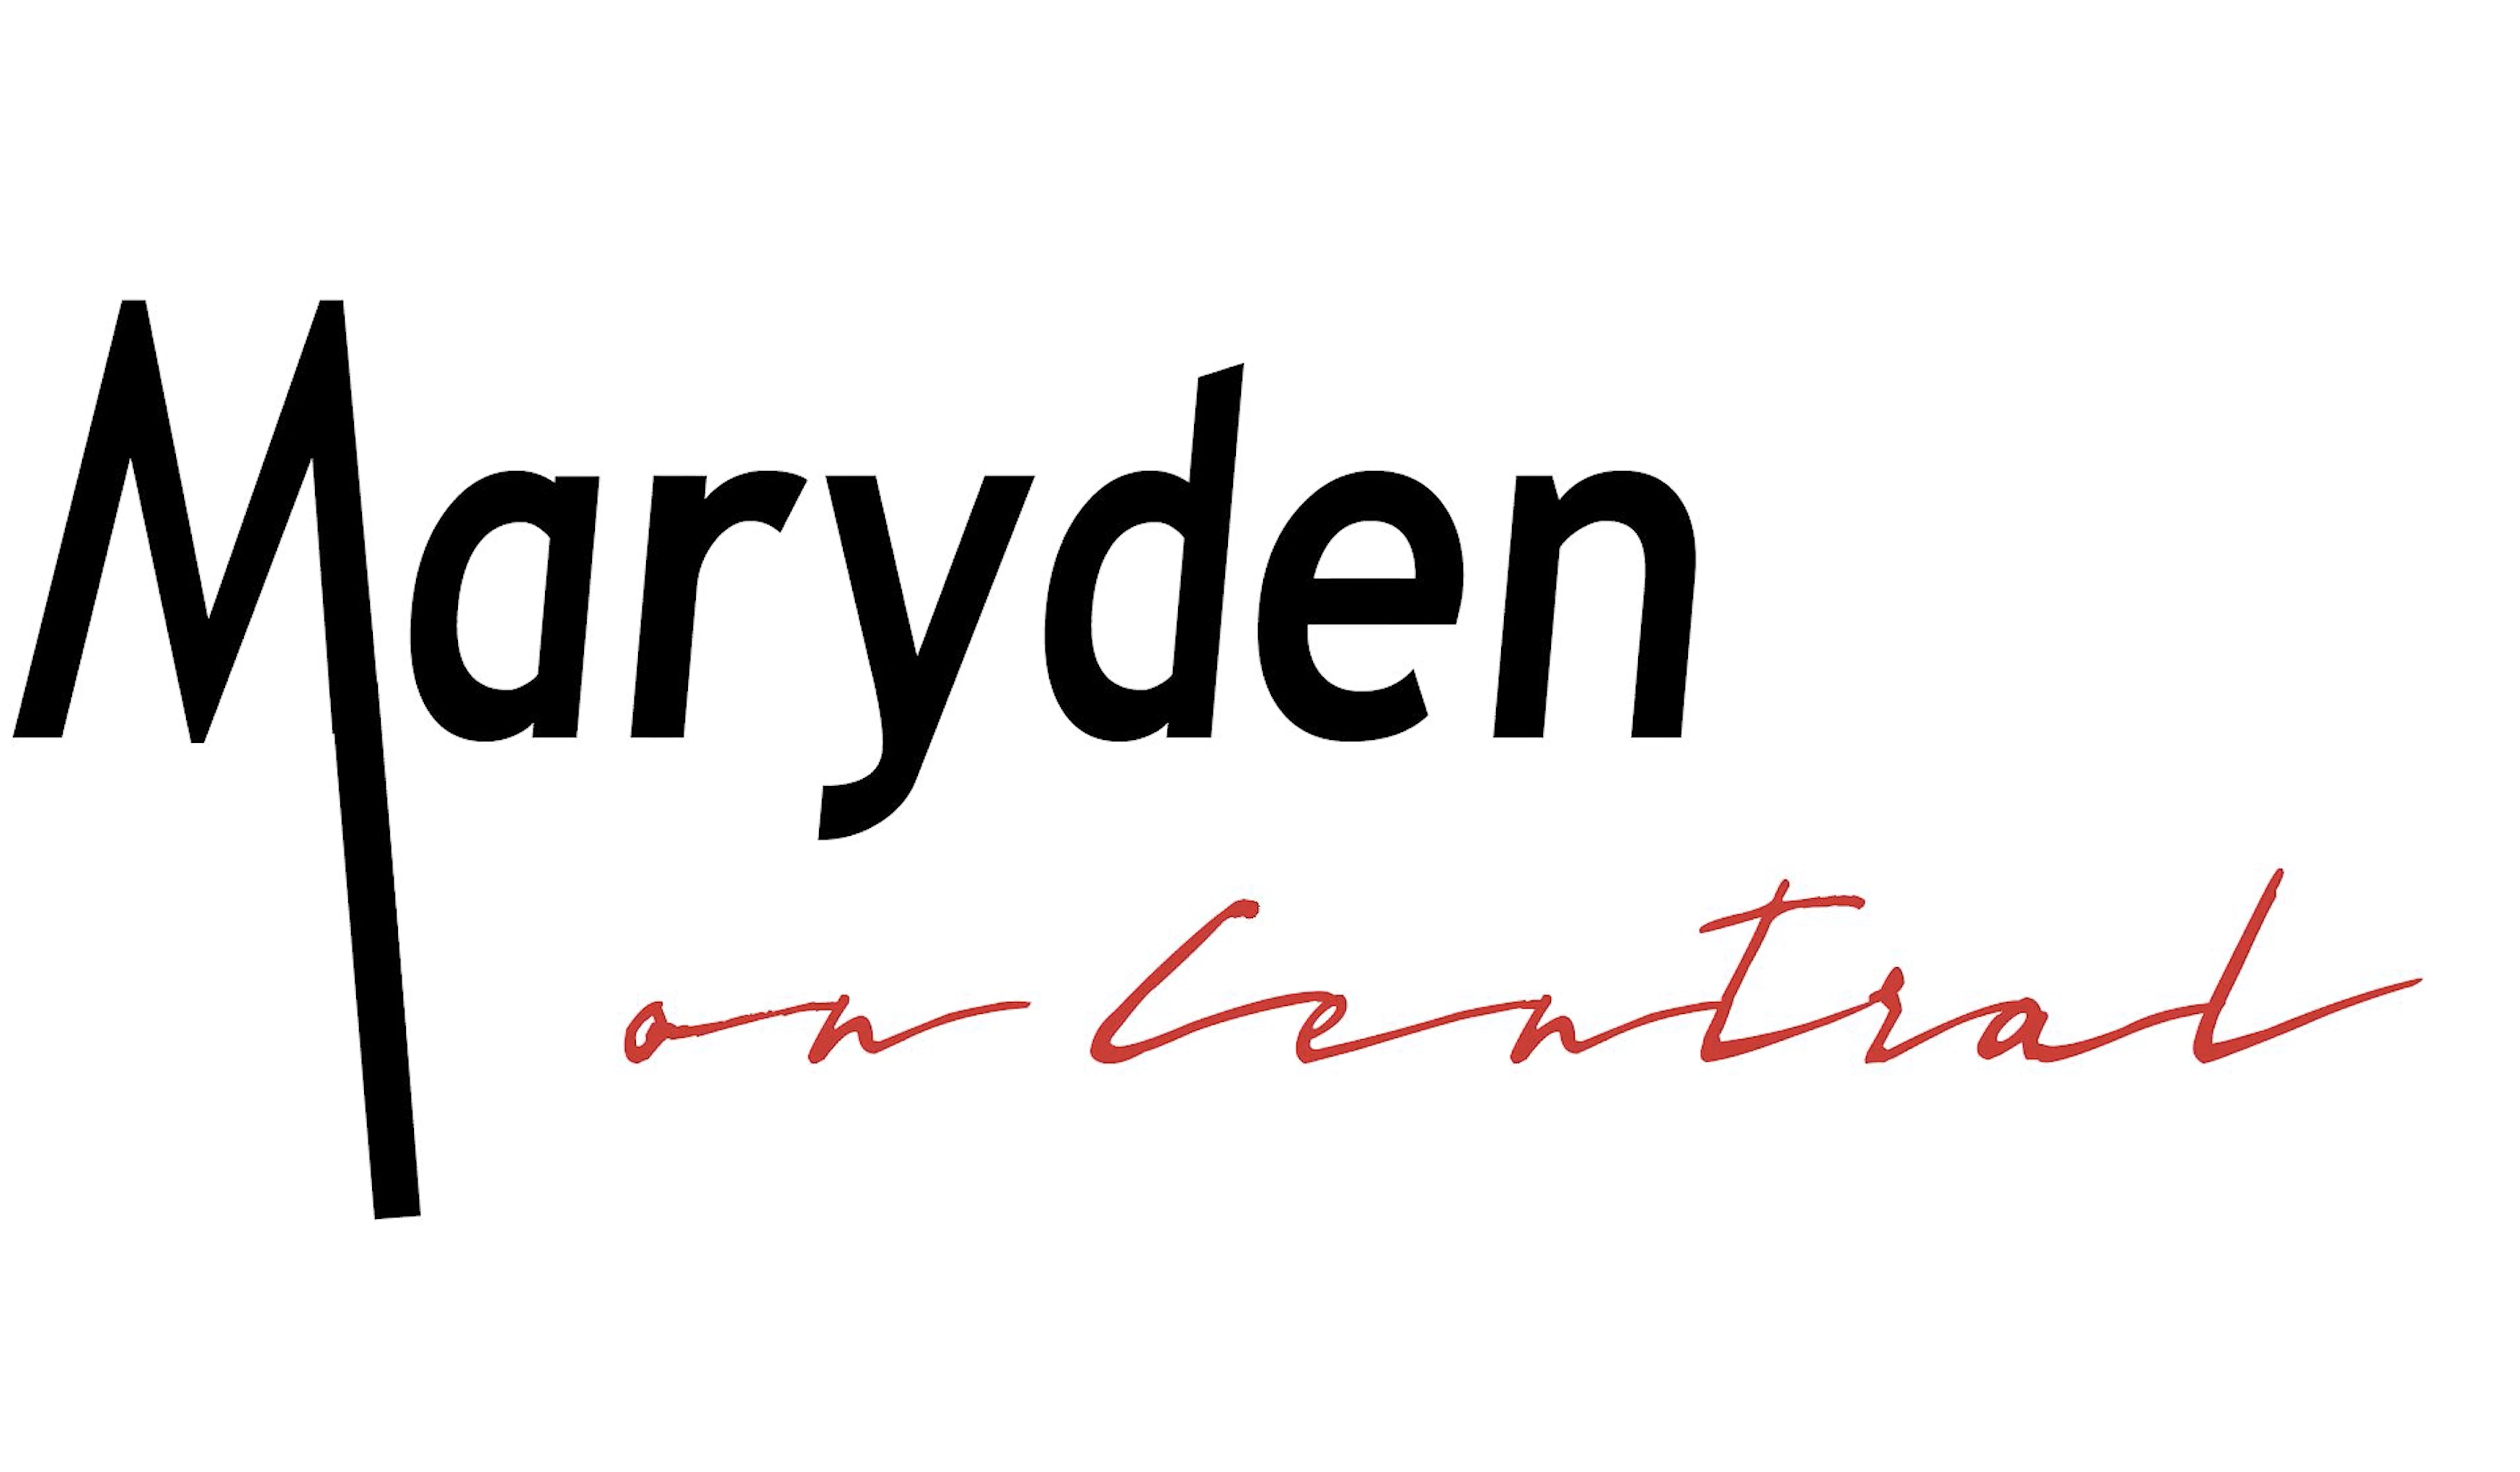 Maryden on Central